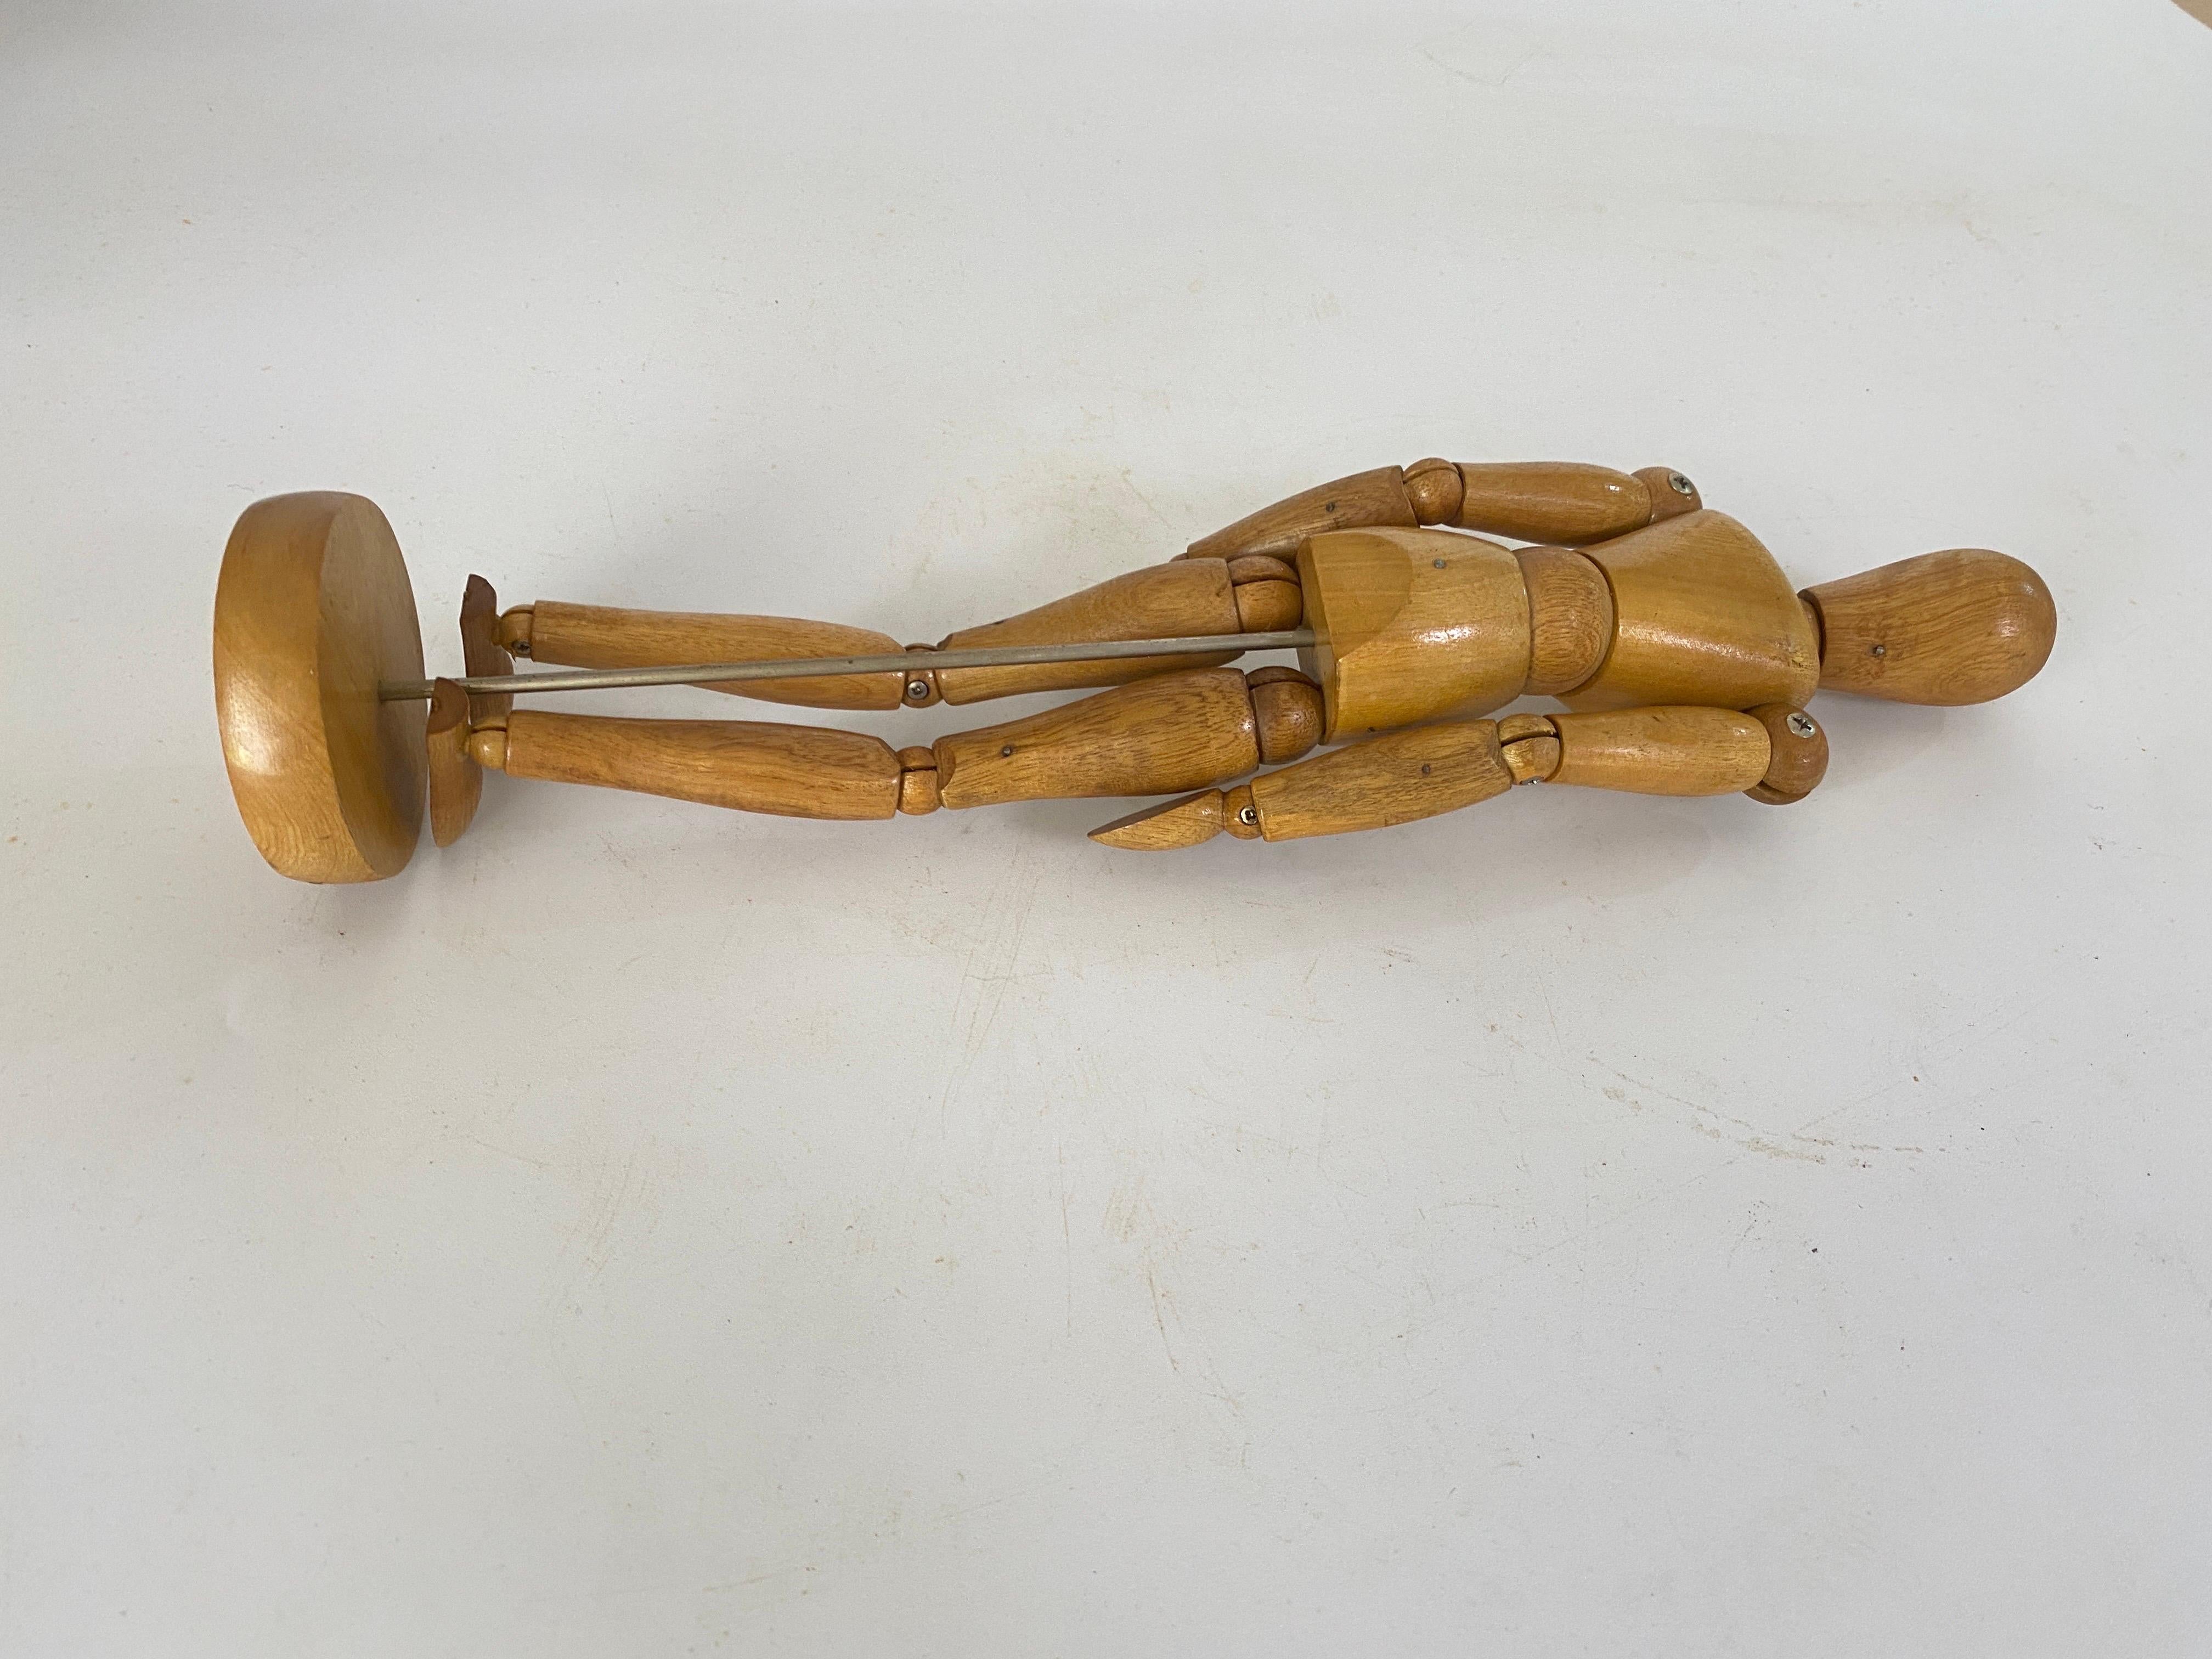 20th century French Articulated Wooden Artists Lay Figure, Mannequin on stand
 
Stunning wooden articulated lay figure from the 20th century in original condition. This item features metal pins, bolts and sprung joints. The figure is attached to a